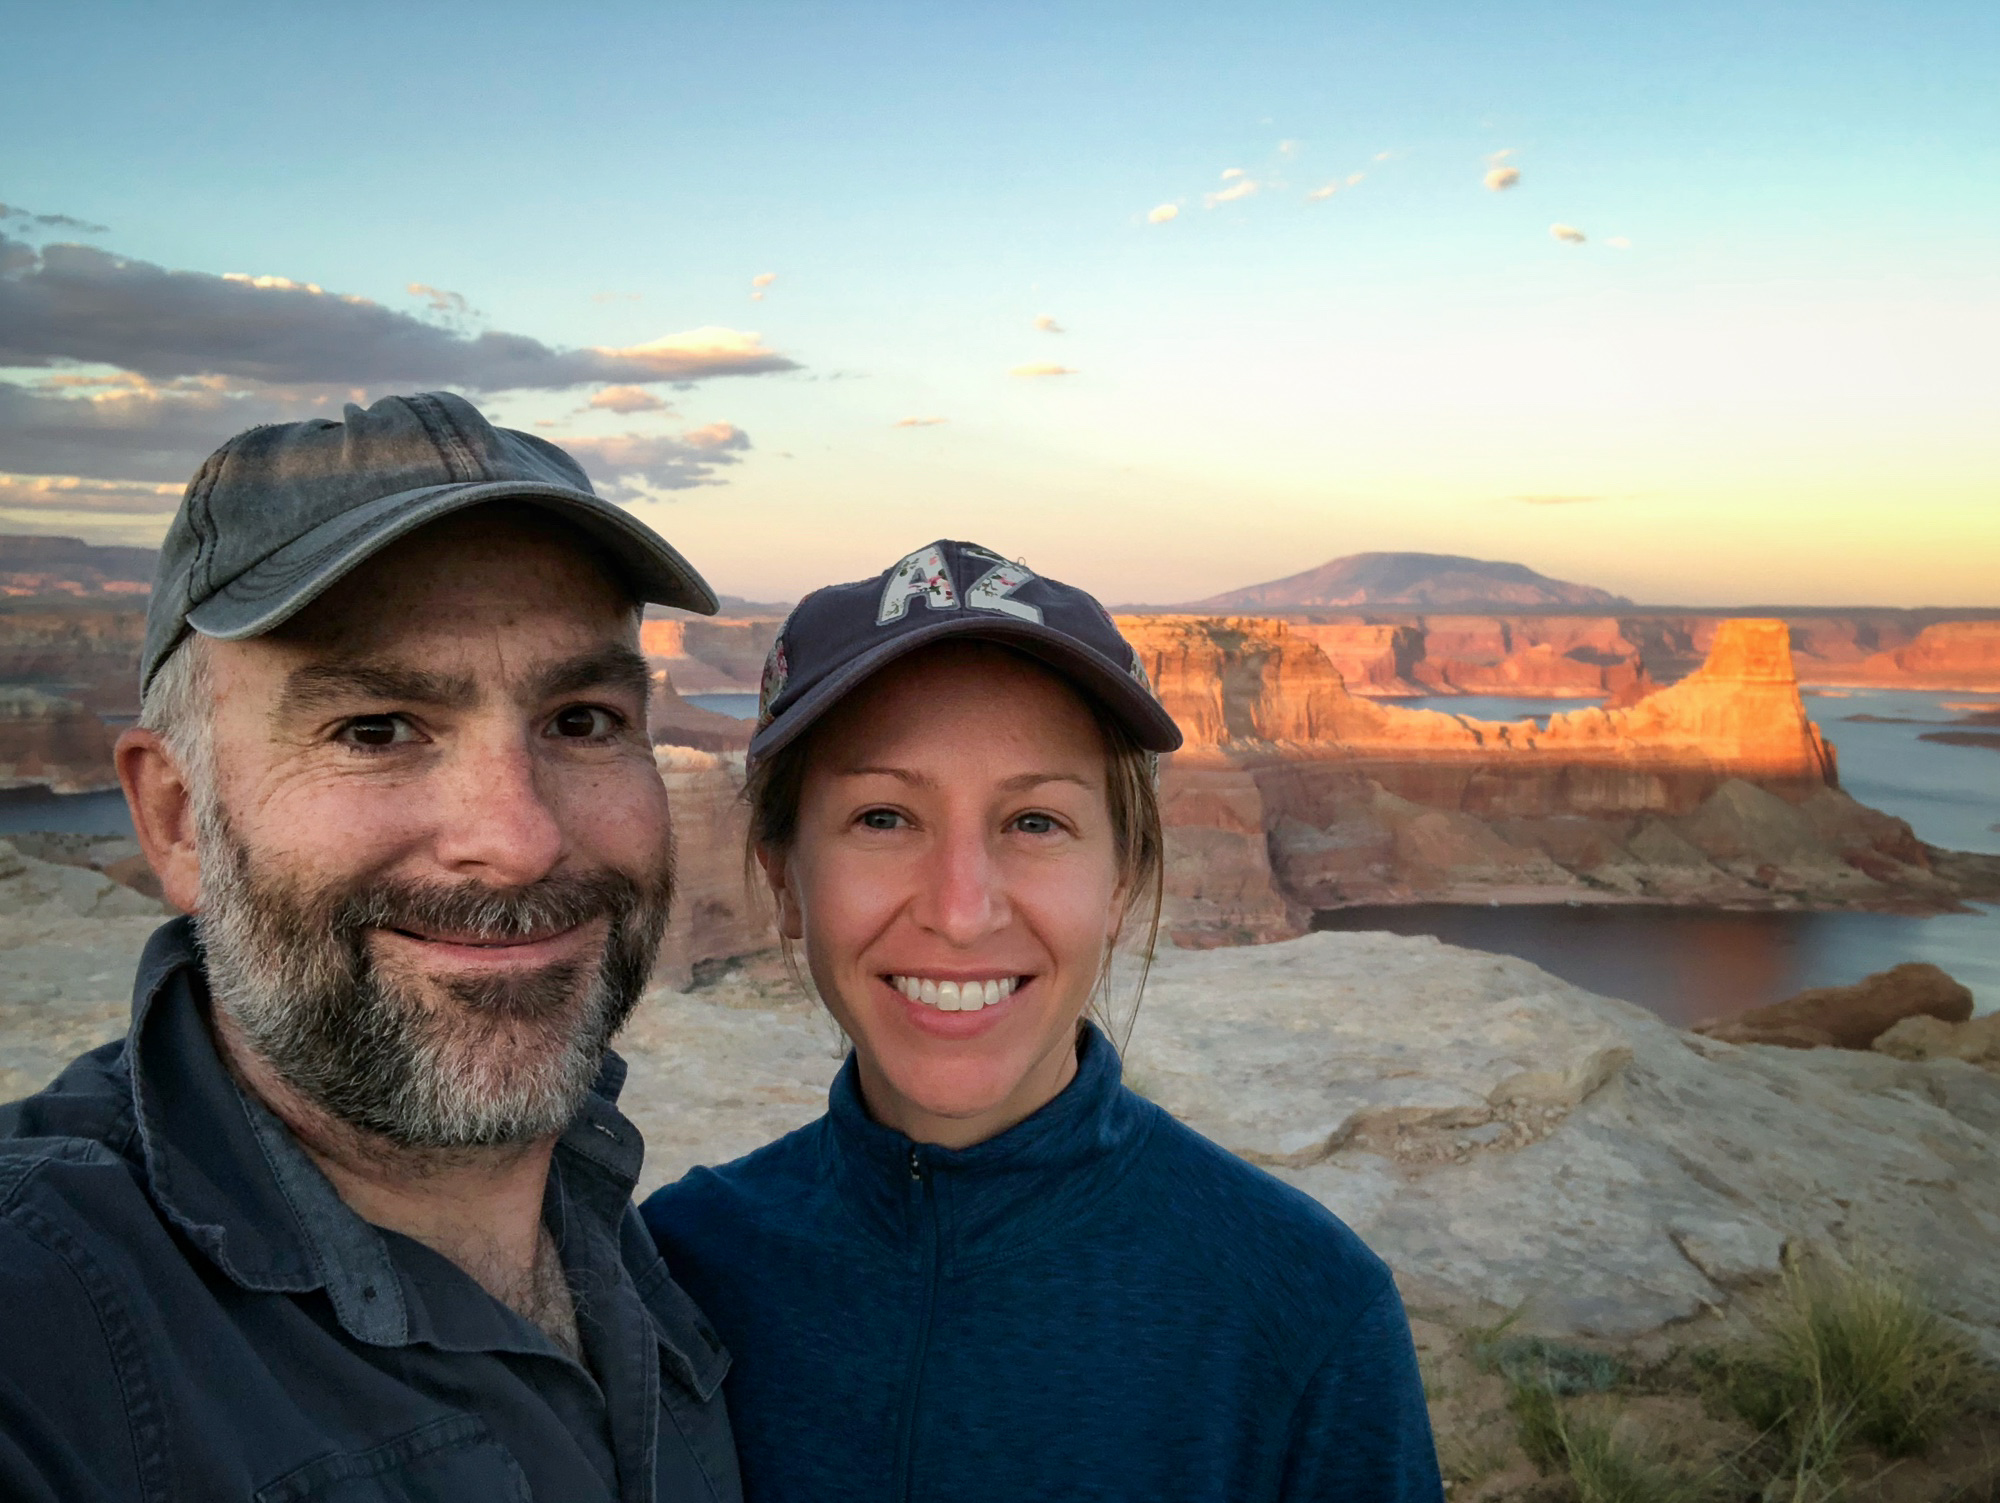 Mark and Kari at Alstrom Point, with Gunsight Butte and Navajo Mountain in the distance.